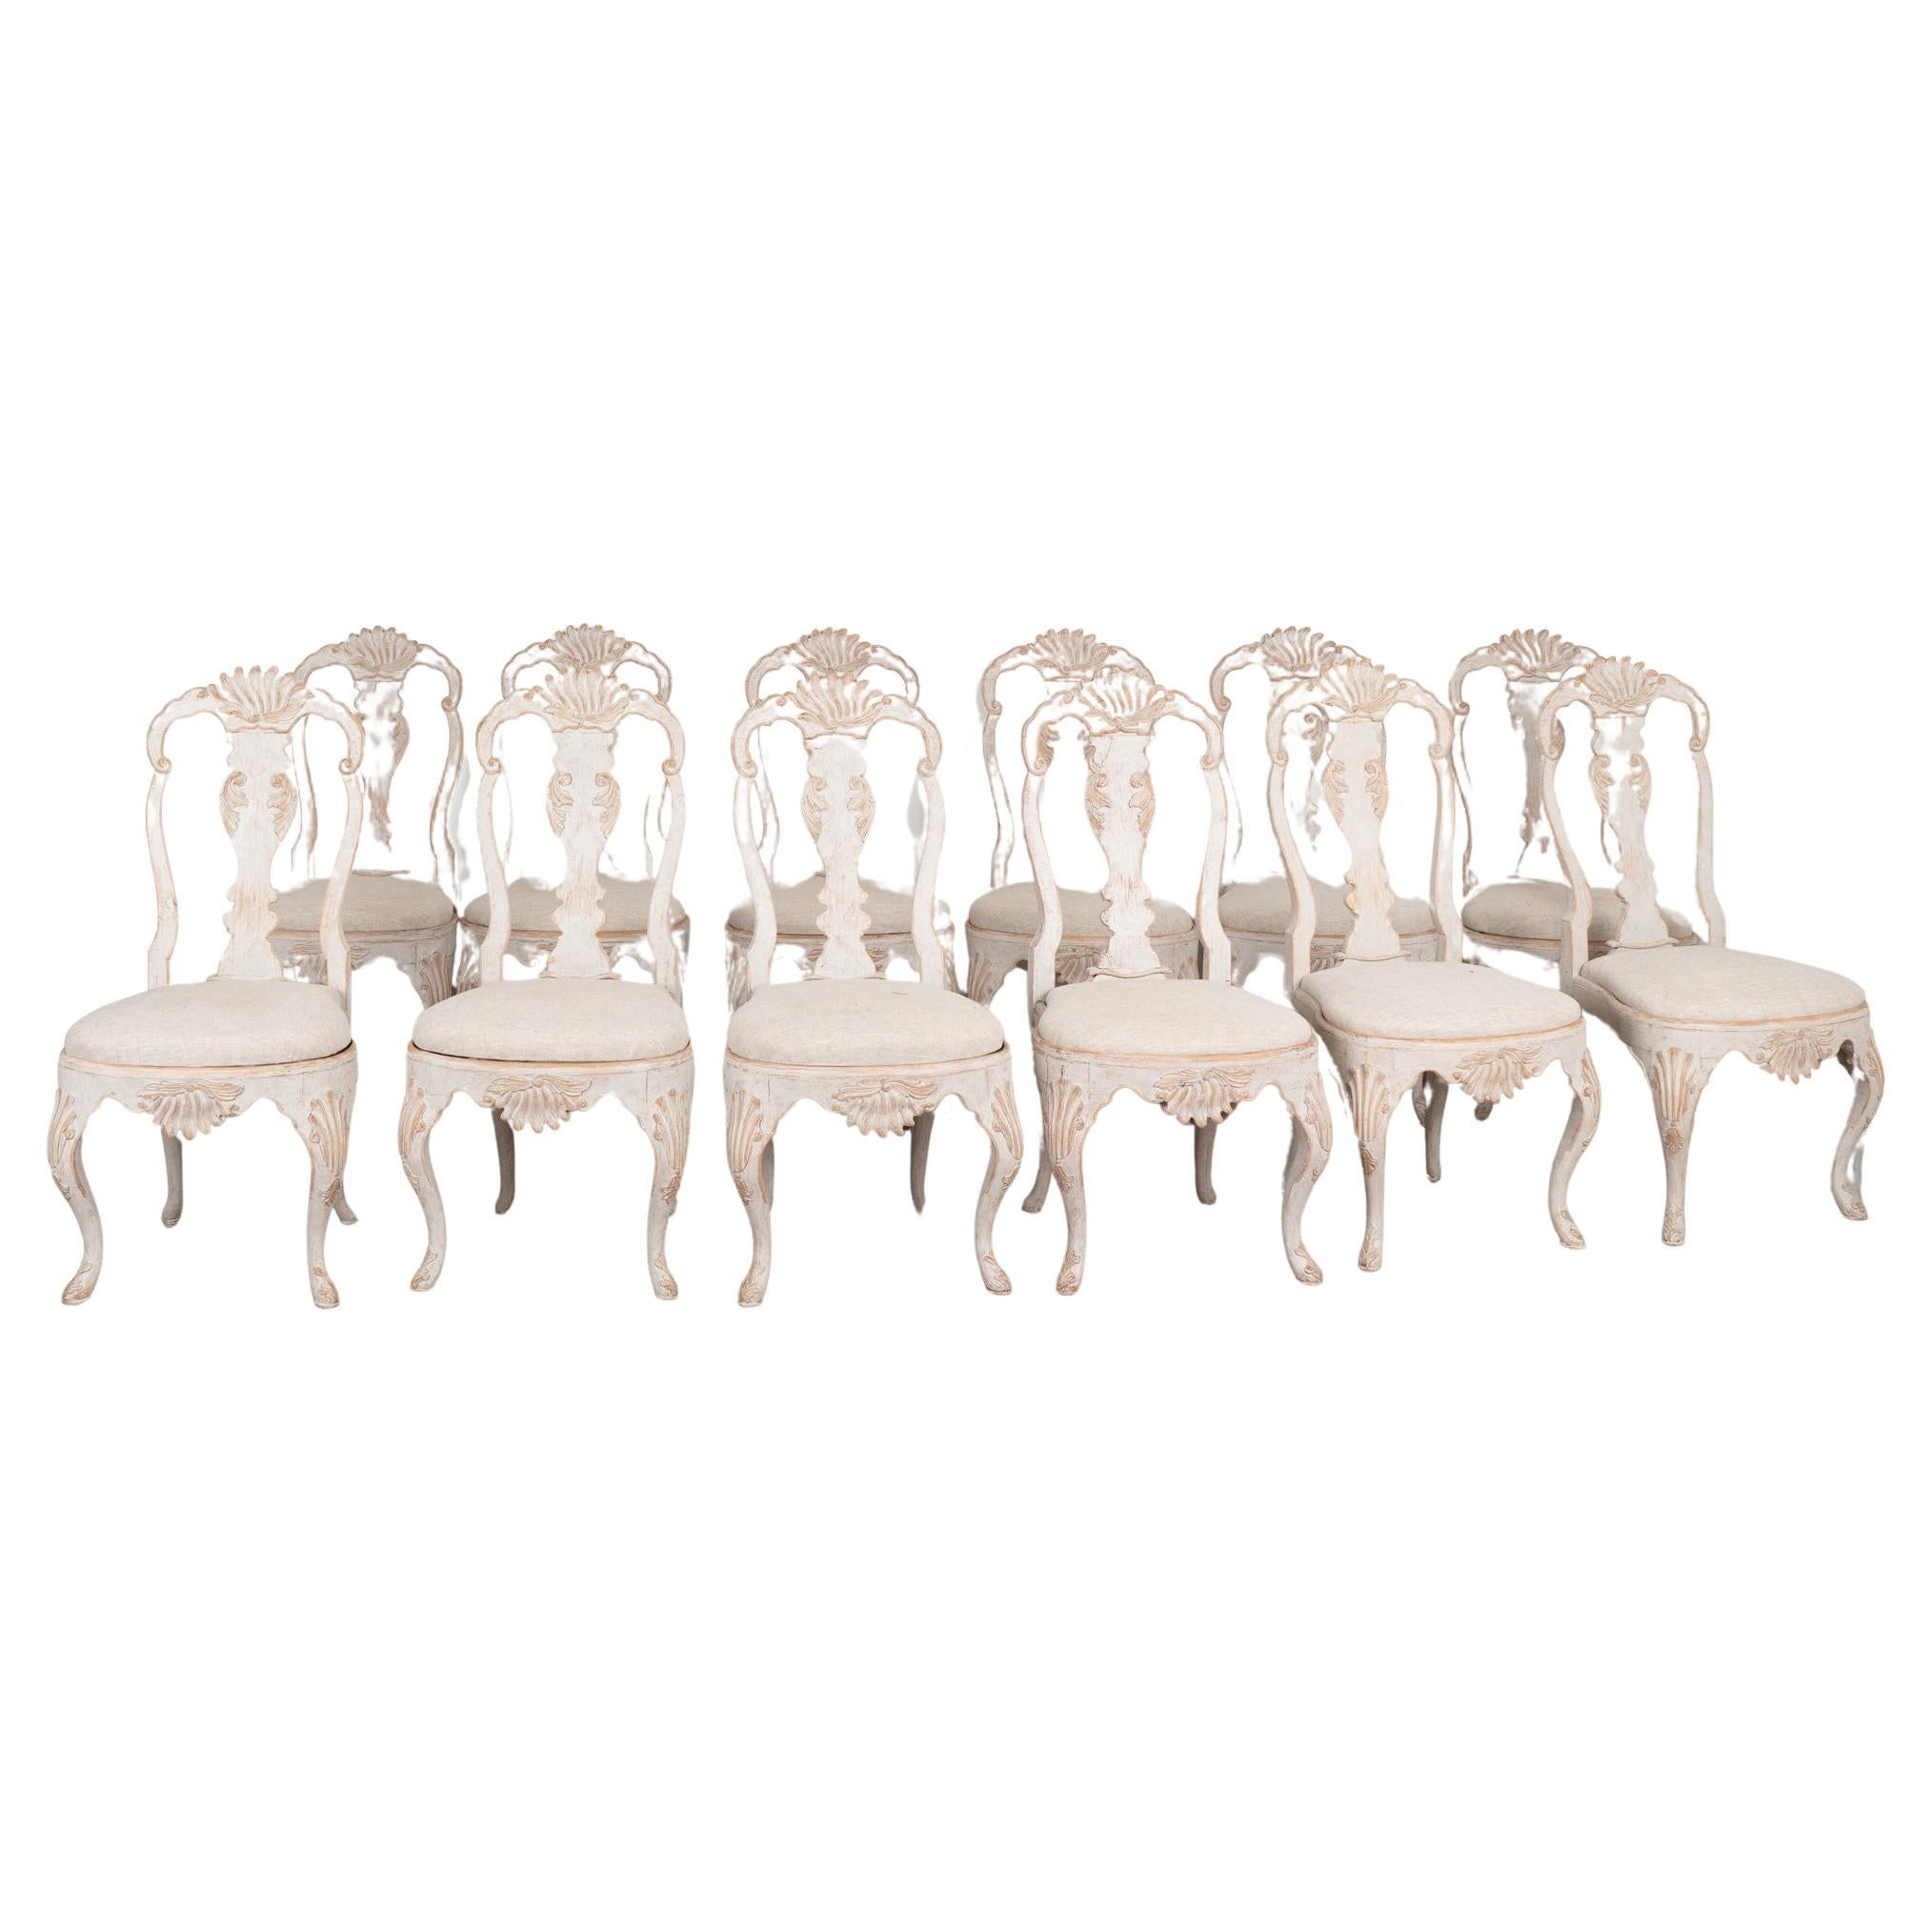 Set of 12 Rococo Swedish Dining Chairs, circa 1900 For Sale